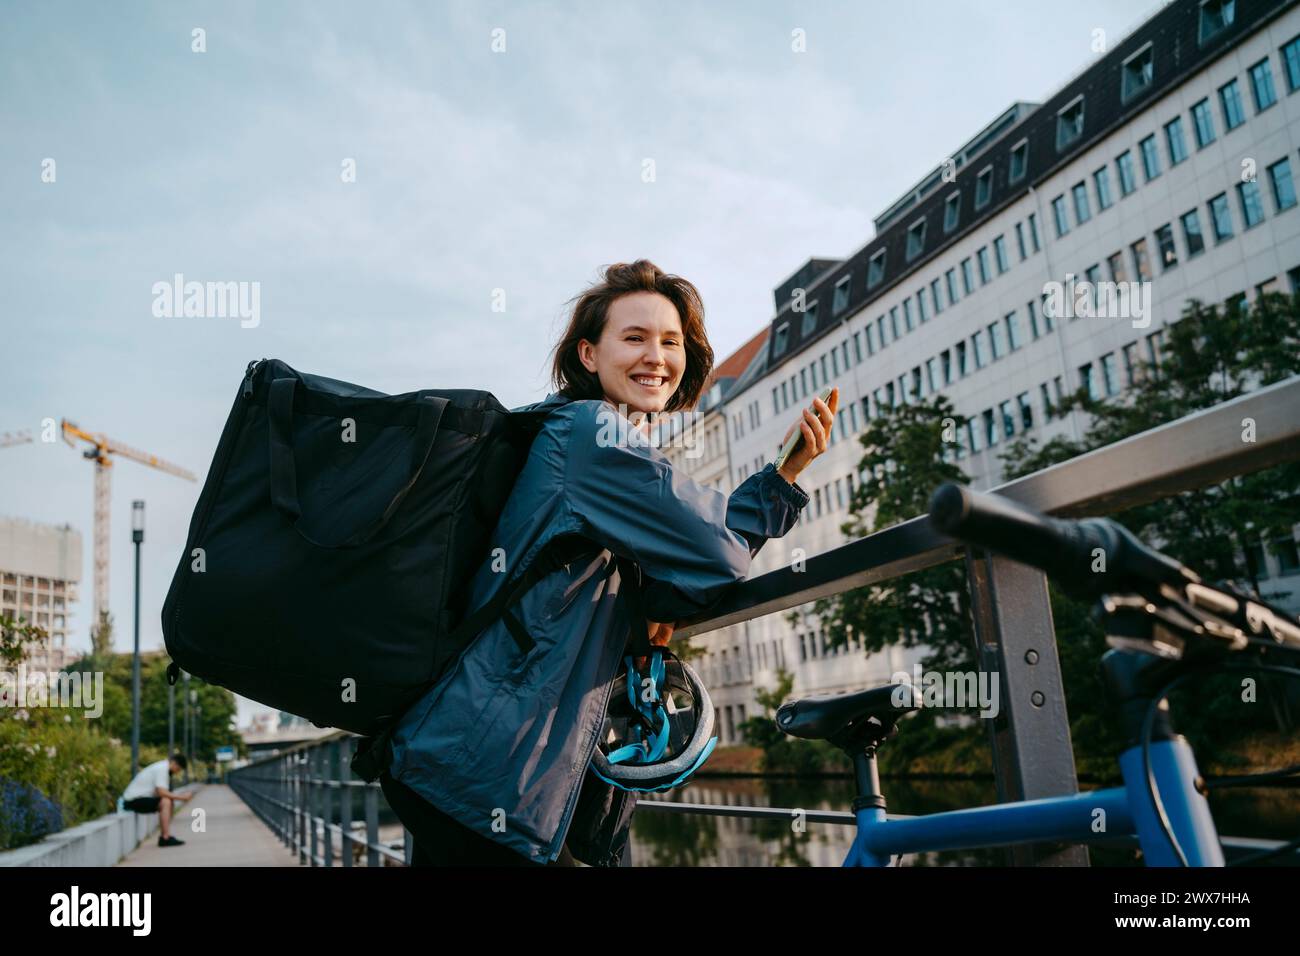 Side view portrait of smiling female delivery person holding smart phone while leaning on railing in city Stock Photo